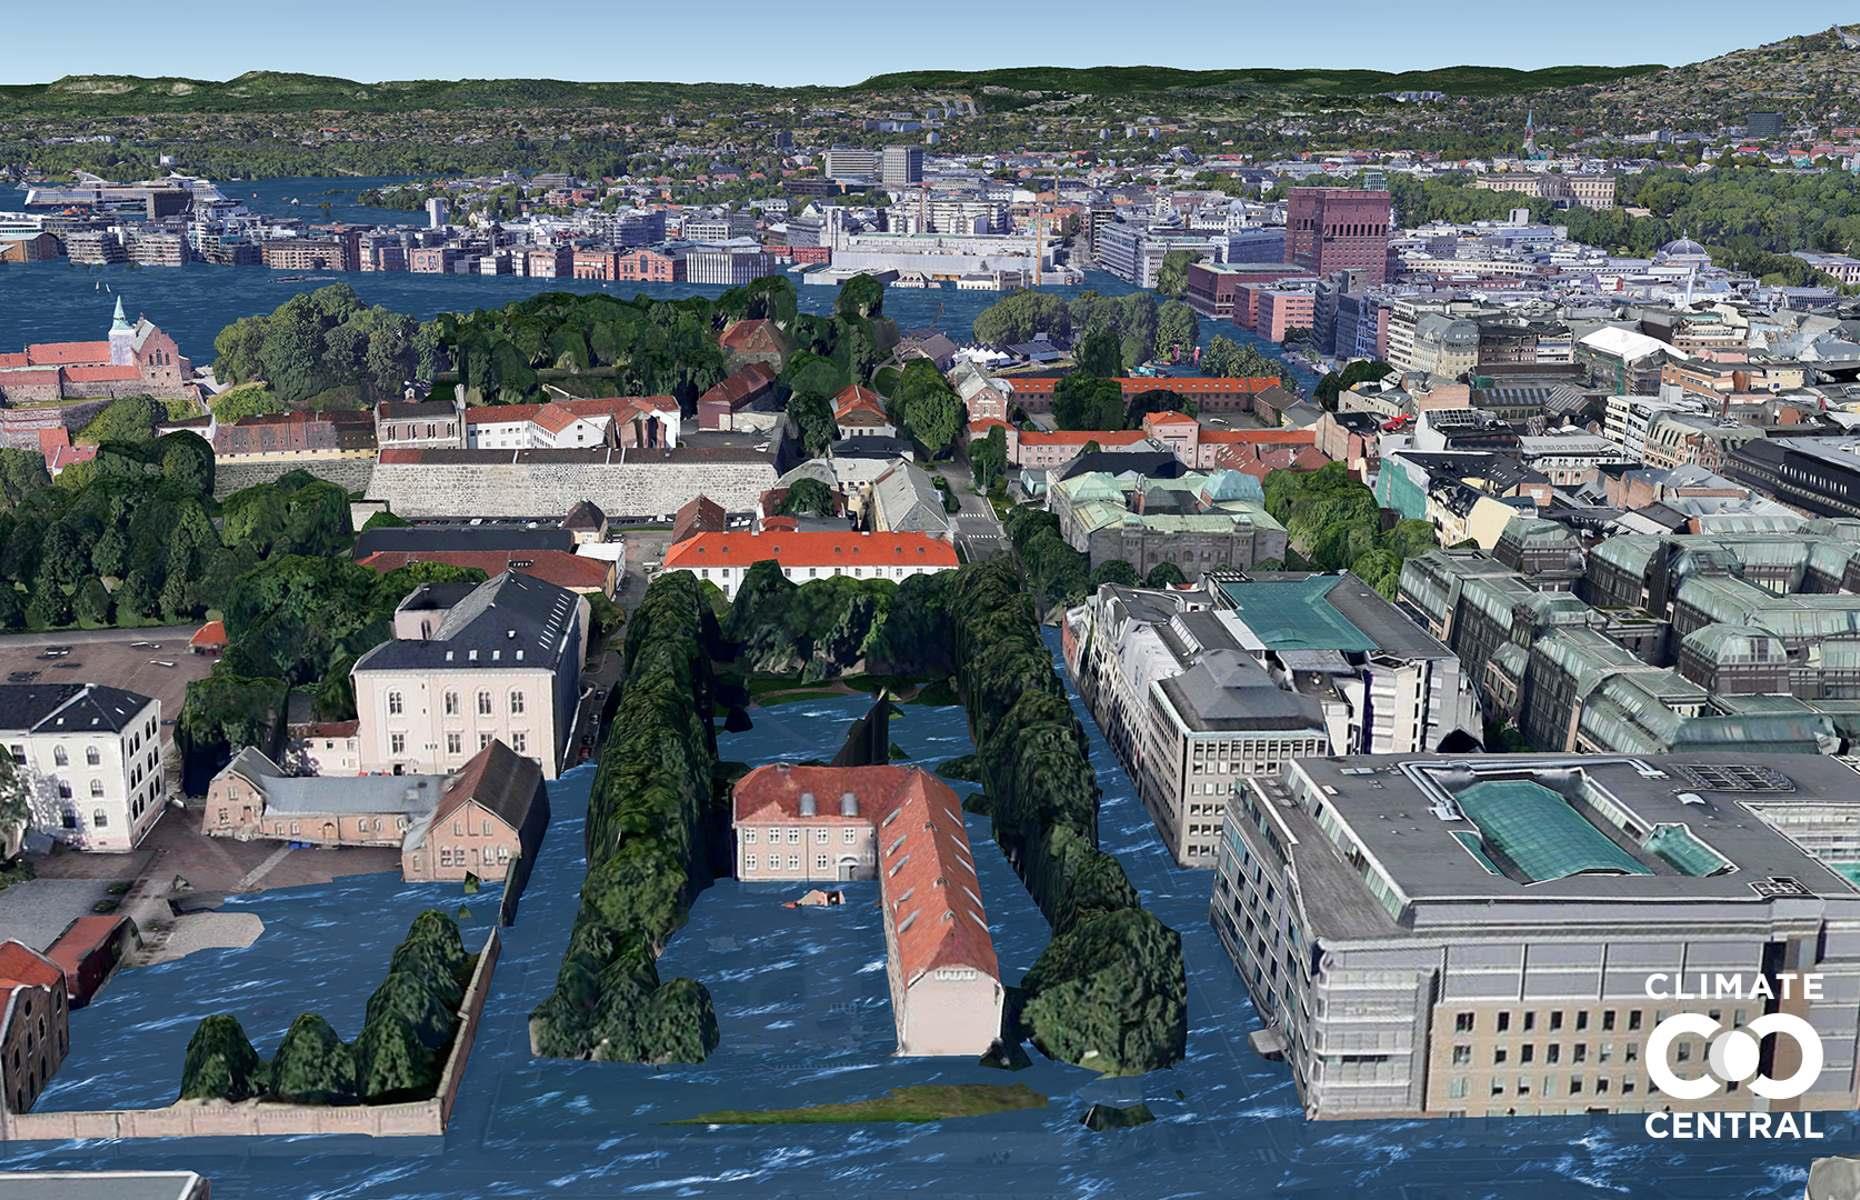 The Norwegian capital is known for its tranquil location on the banks of the Oslofjord, providing stunning scenery year-round. Yet 3°C (5.4°F) of warming is set to bring chaos to the city, as this shocking image of a flooded Grev Wedels Plass (a square near the water's edge) shows.